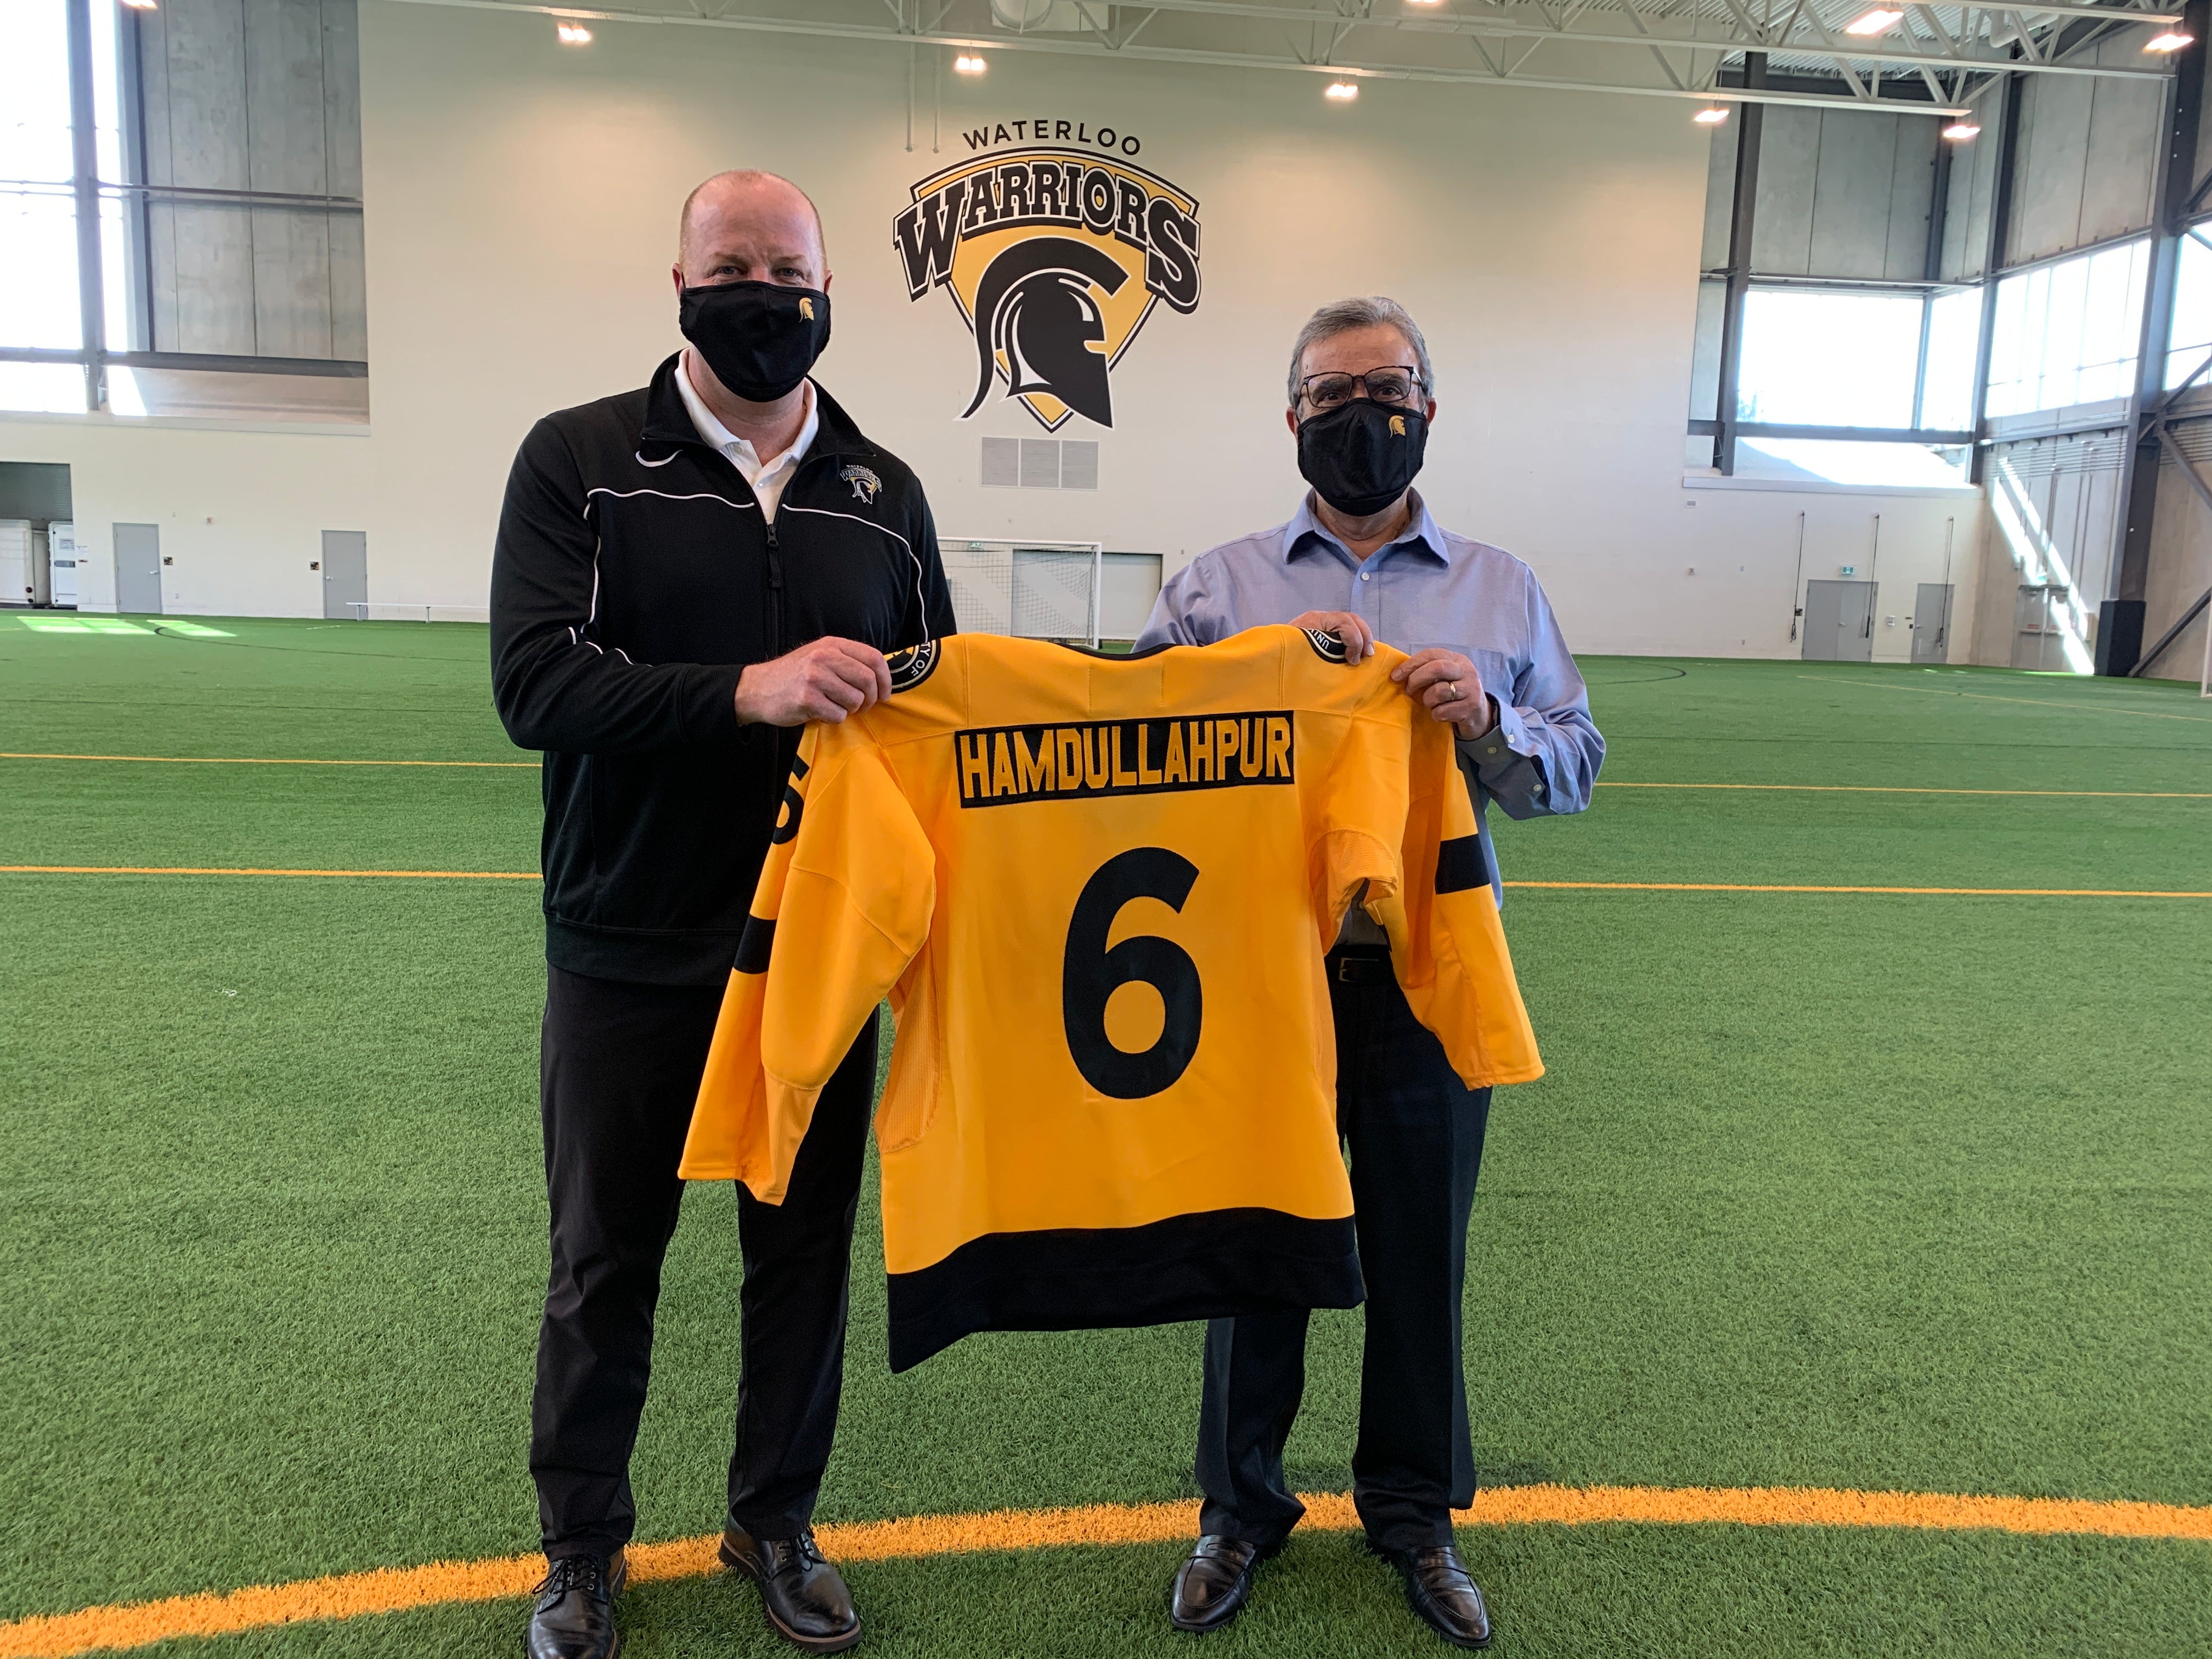 Roly Webster and Feridun Hamdullahpur holding a jersey that says Hamdullahpur